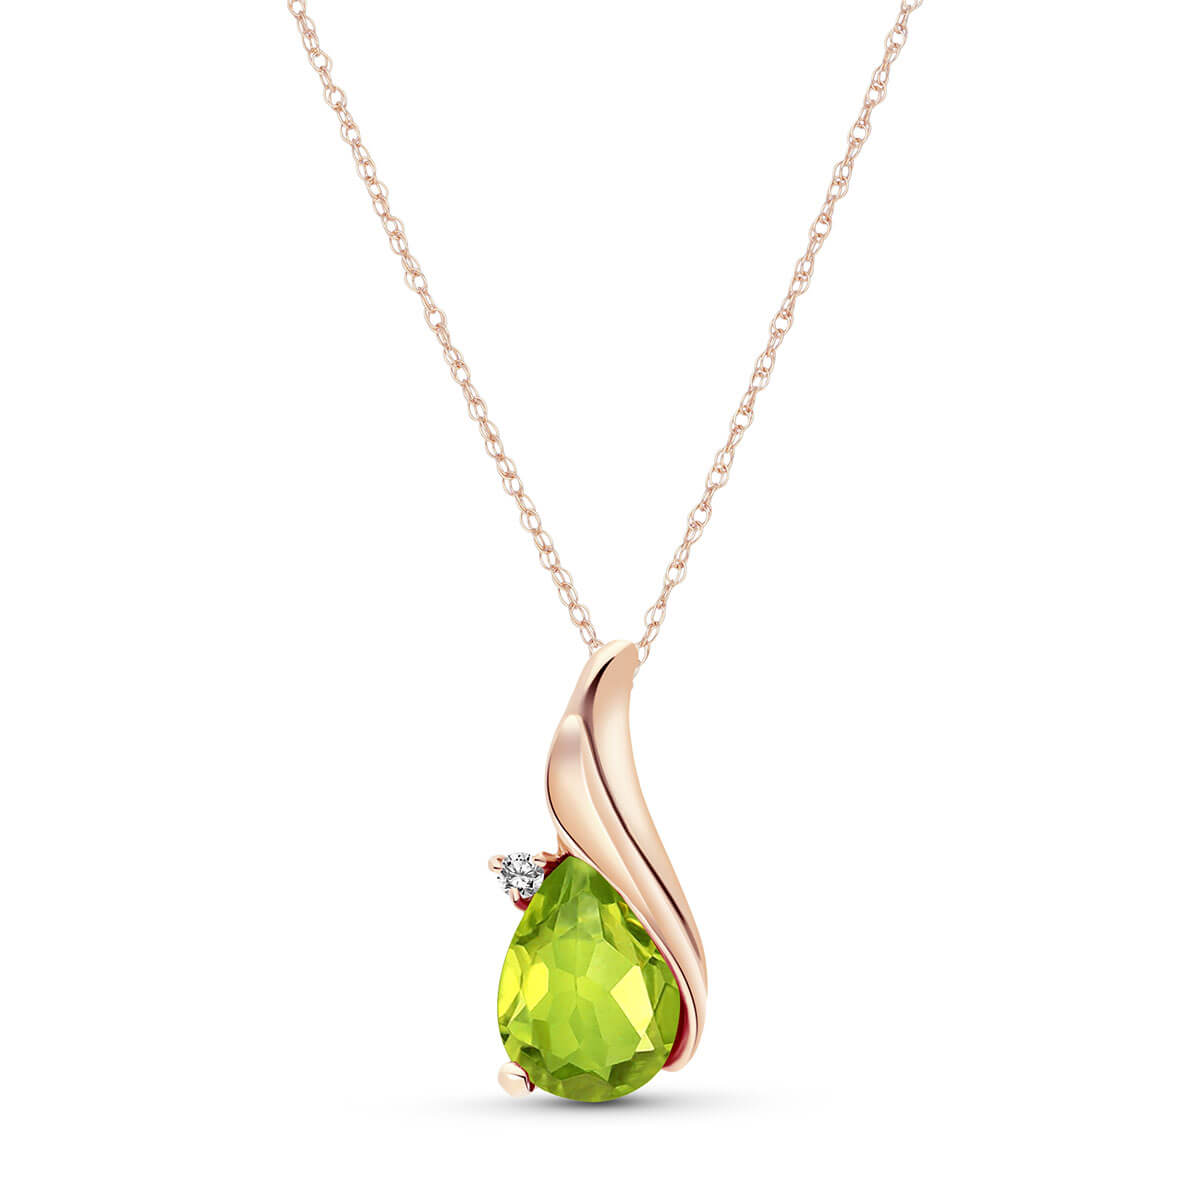 Pear Cut Peridot Pendant Necklace 2.03 ctw in 9ct Rose Gold